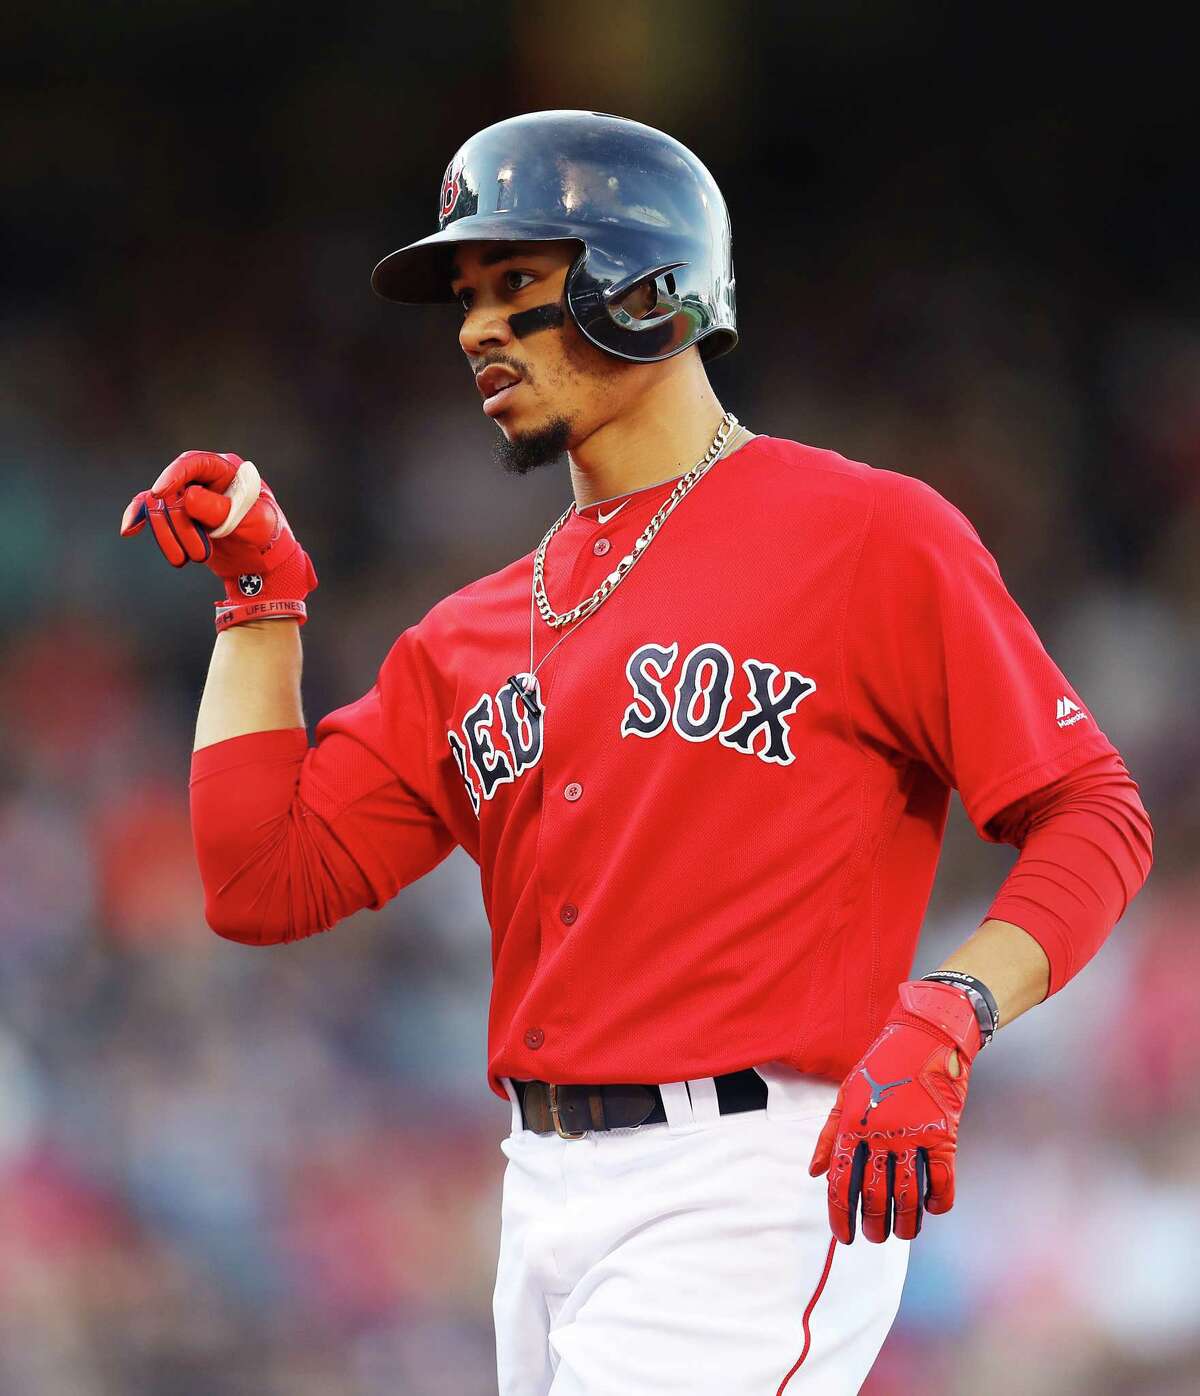 BOSTON, MASSACHUSETTS - SEPTEMBER 29: Mookie Betts #50 of the Boston Red Sox celebrates after hitting a single during the third inning against the Baltimore Orioles at Fenway Park on September 29, 2019 in Boston, Massachusetts. (Photo by Maddie Meyer/Getty Images)